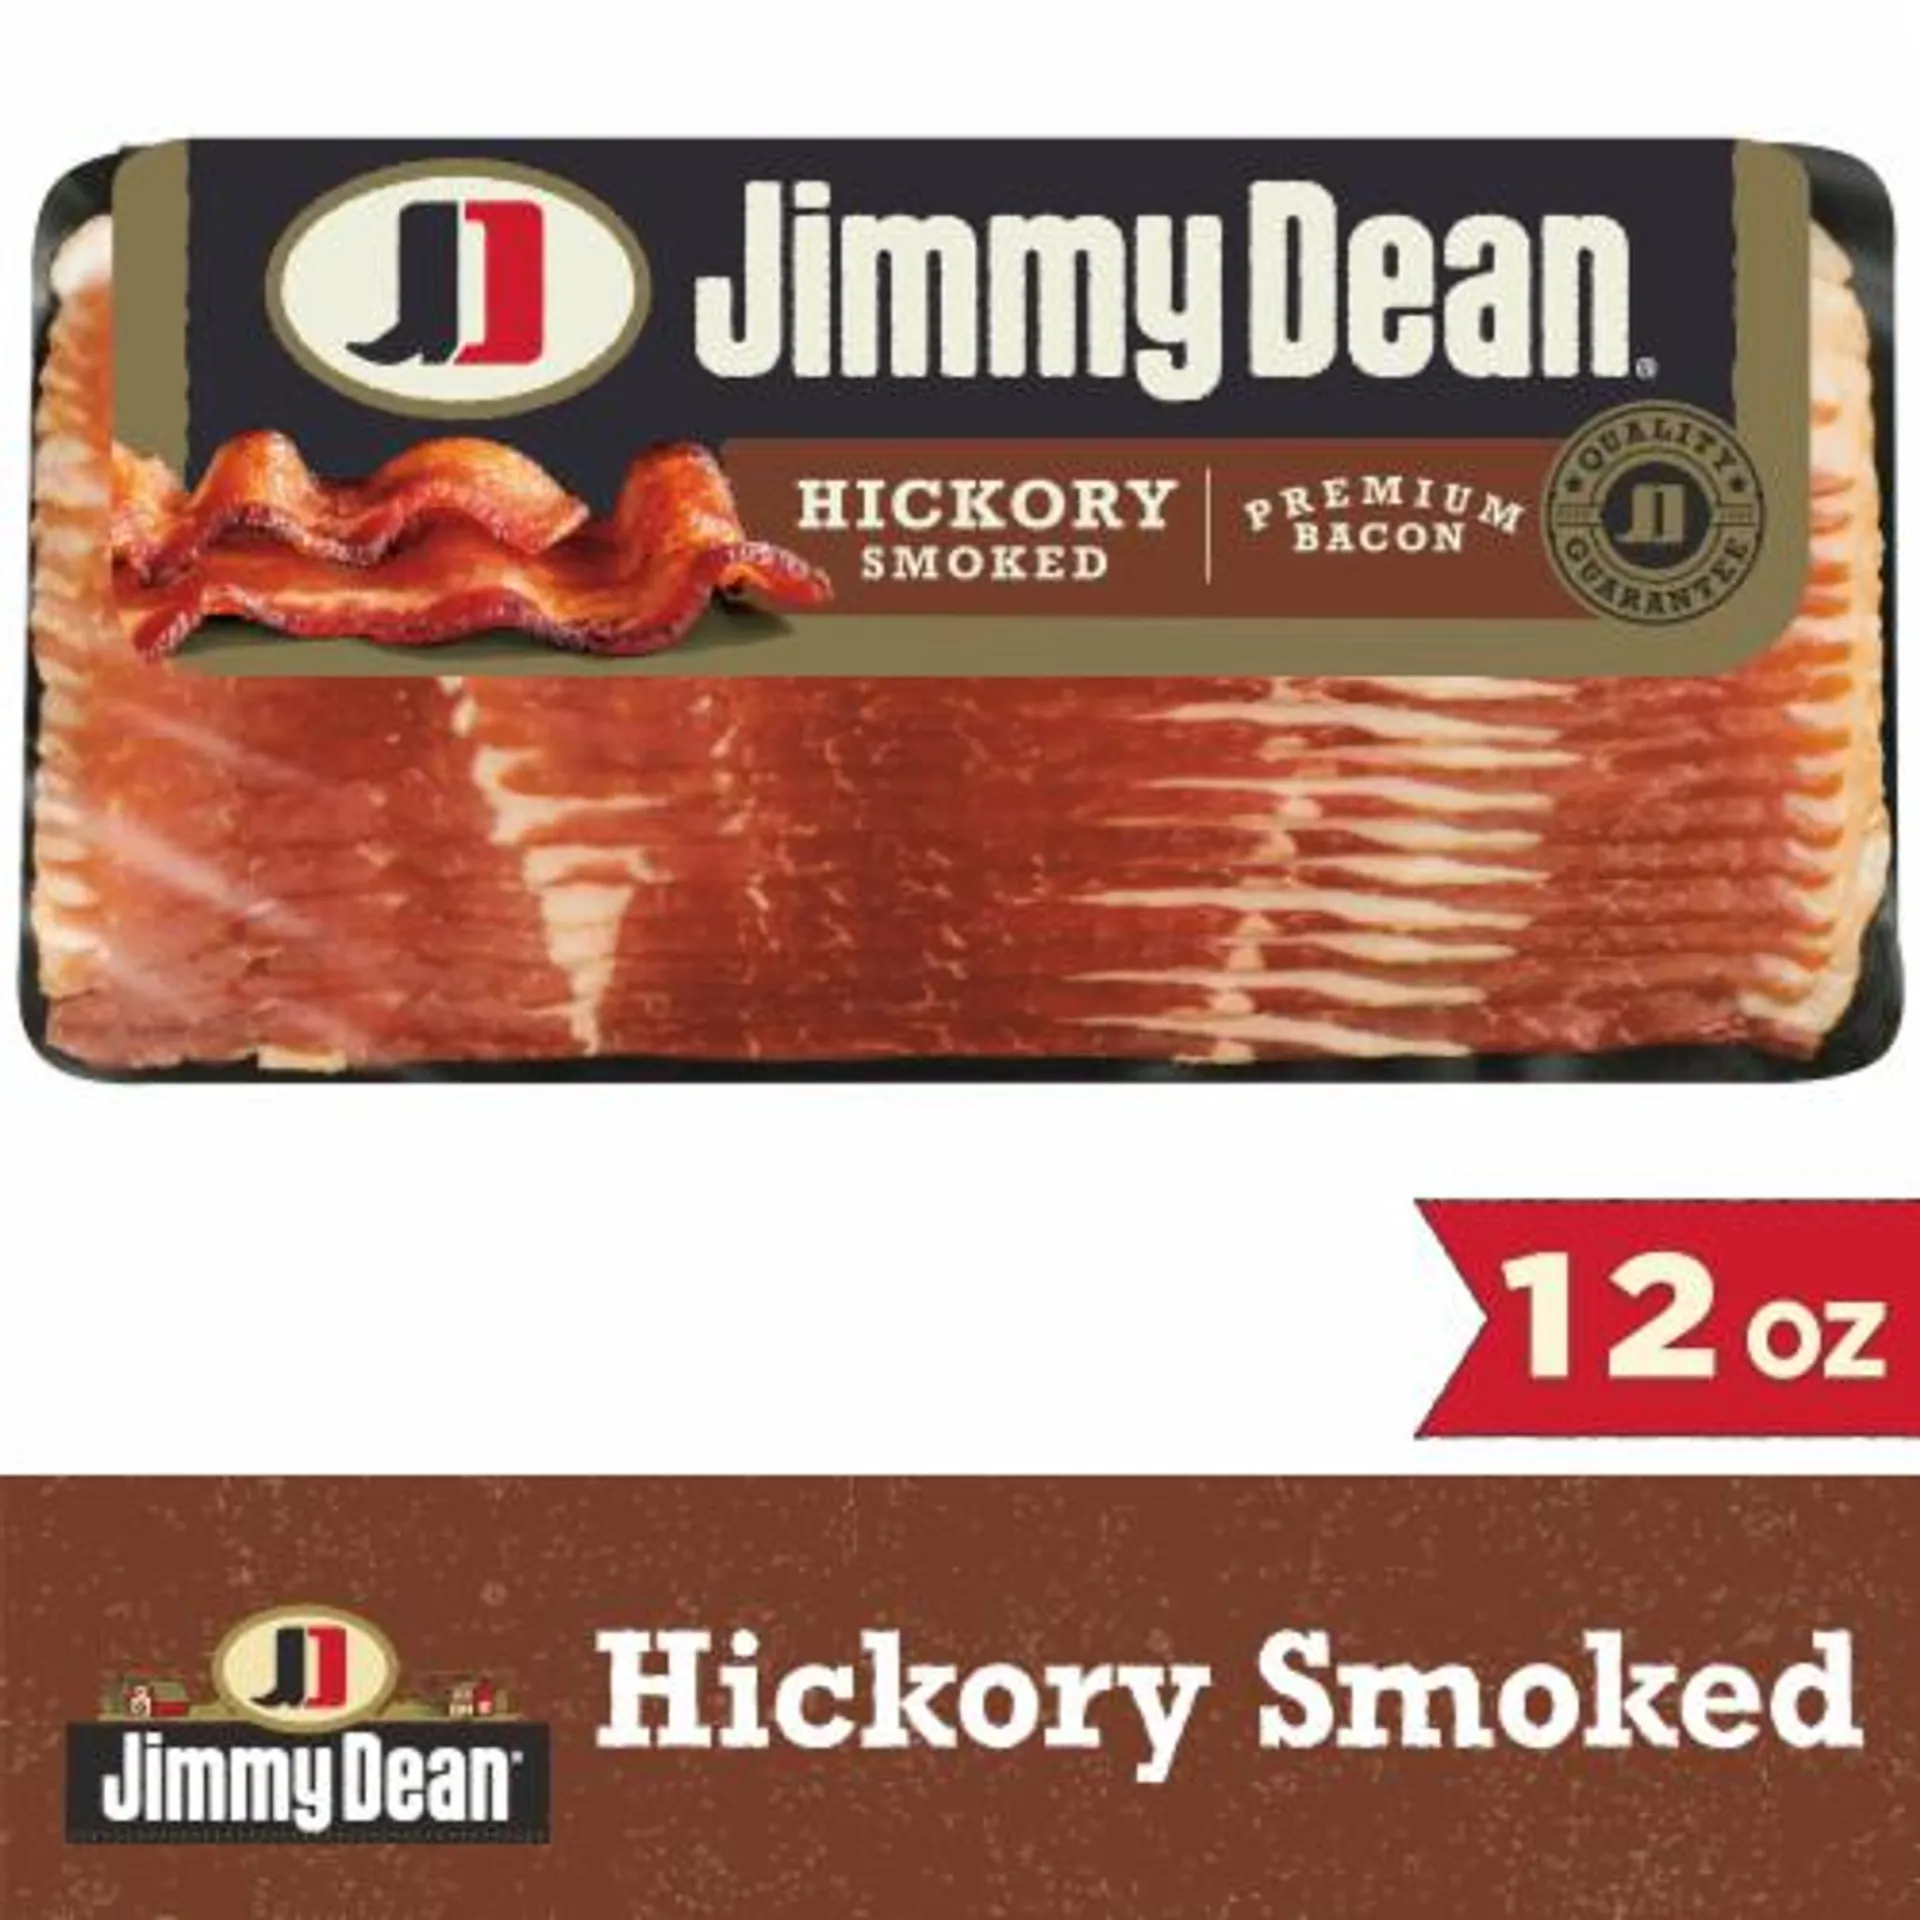 Jimmy Dean Premium Bacon Hickory Smoked